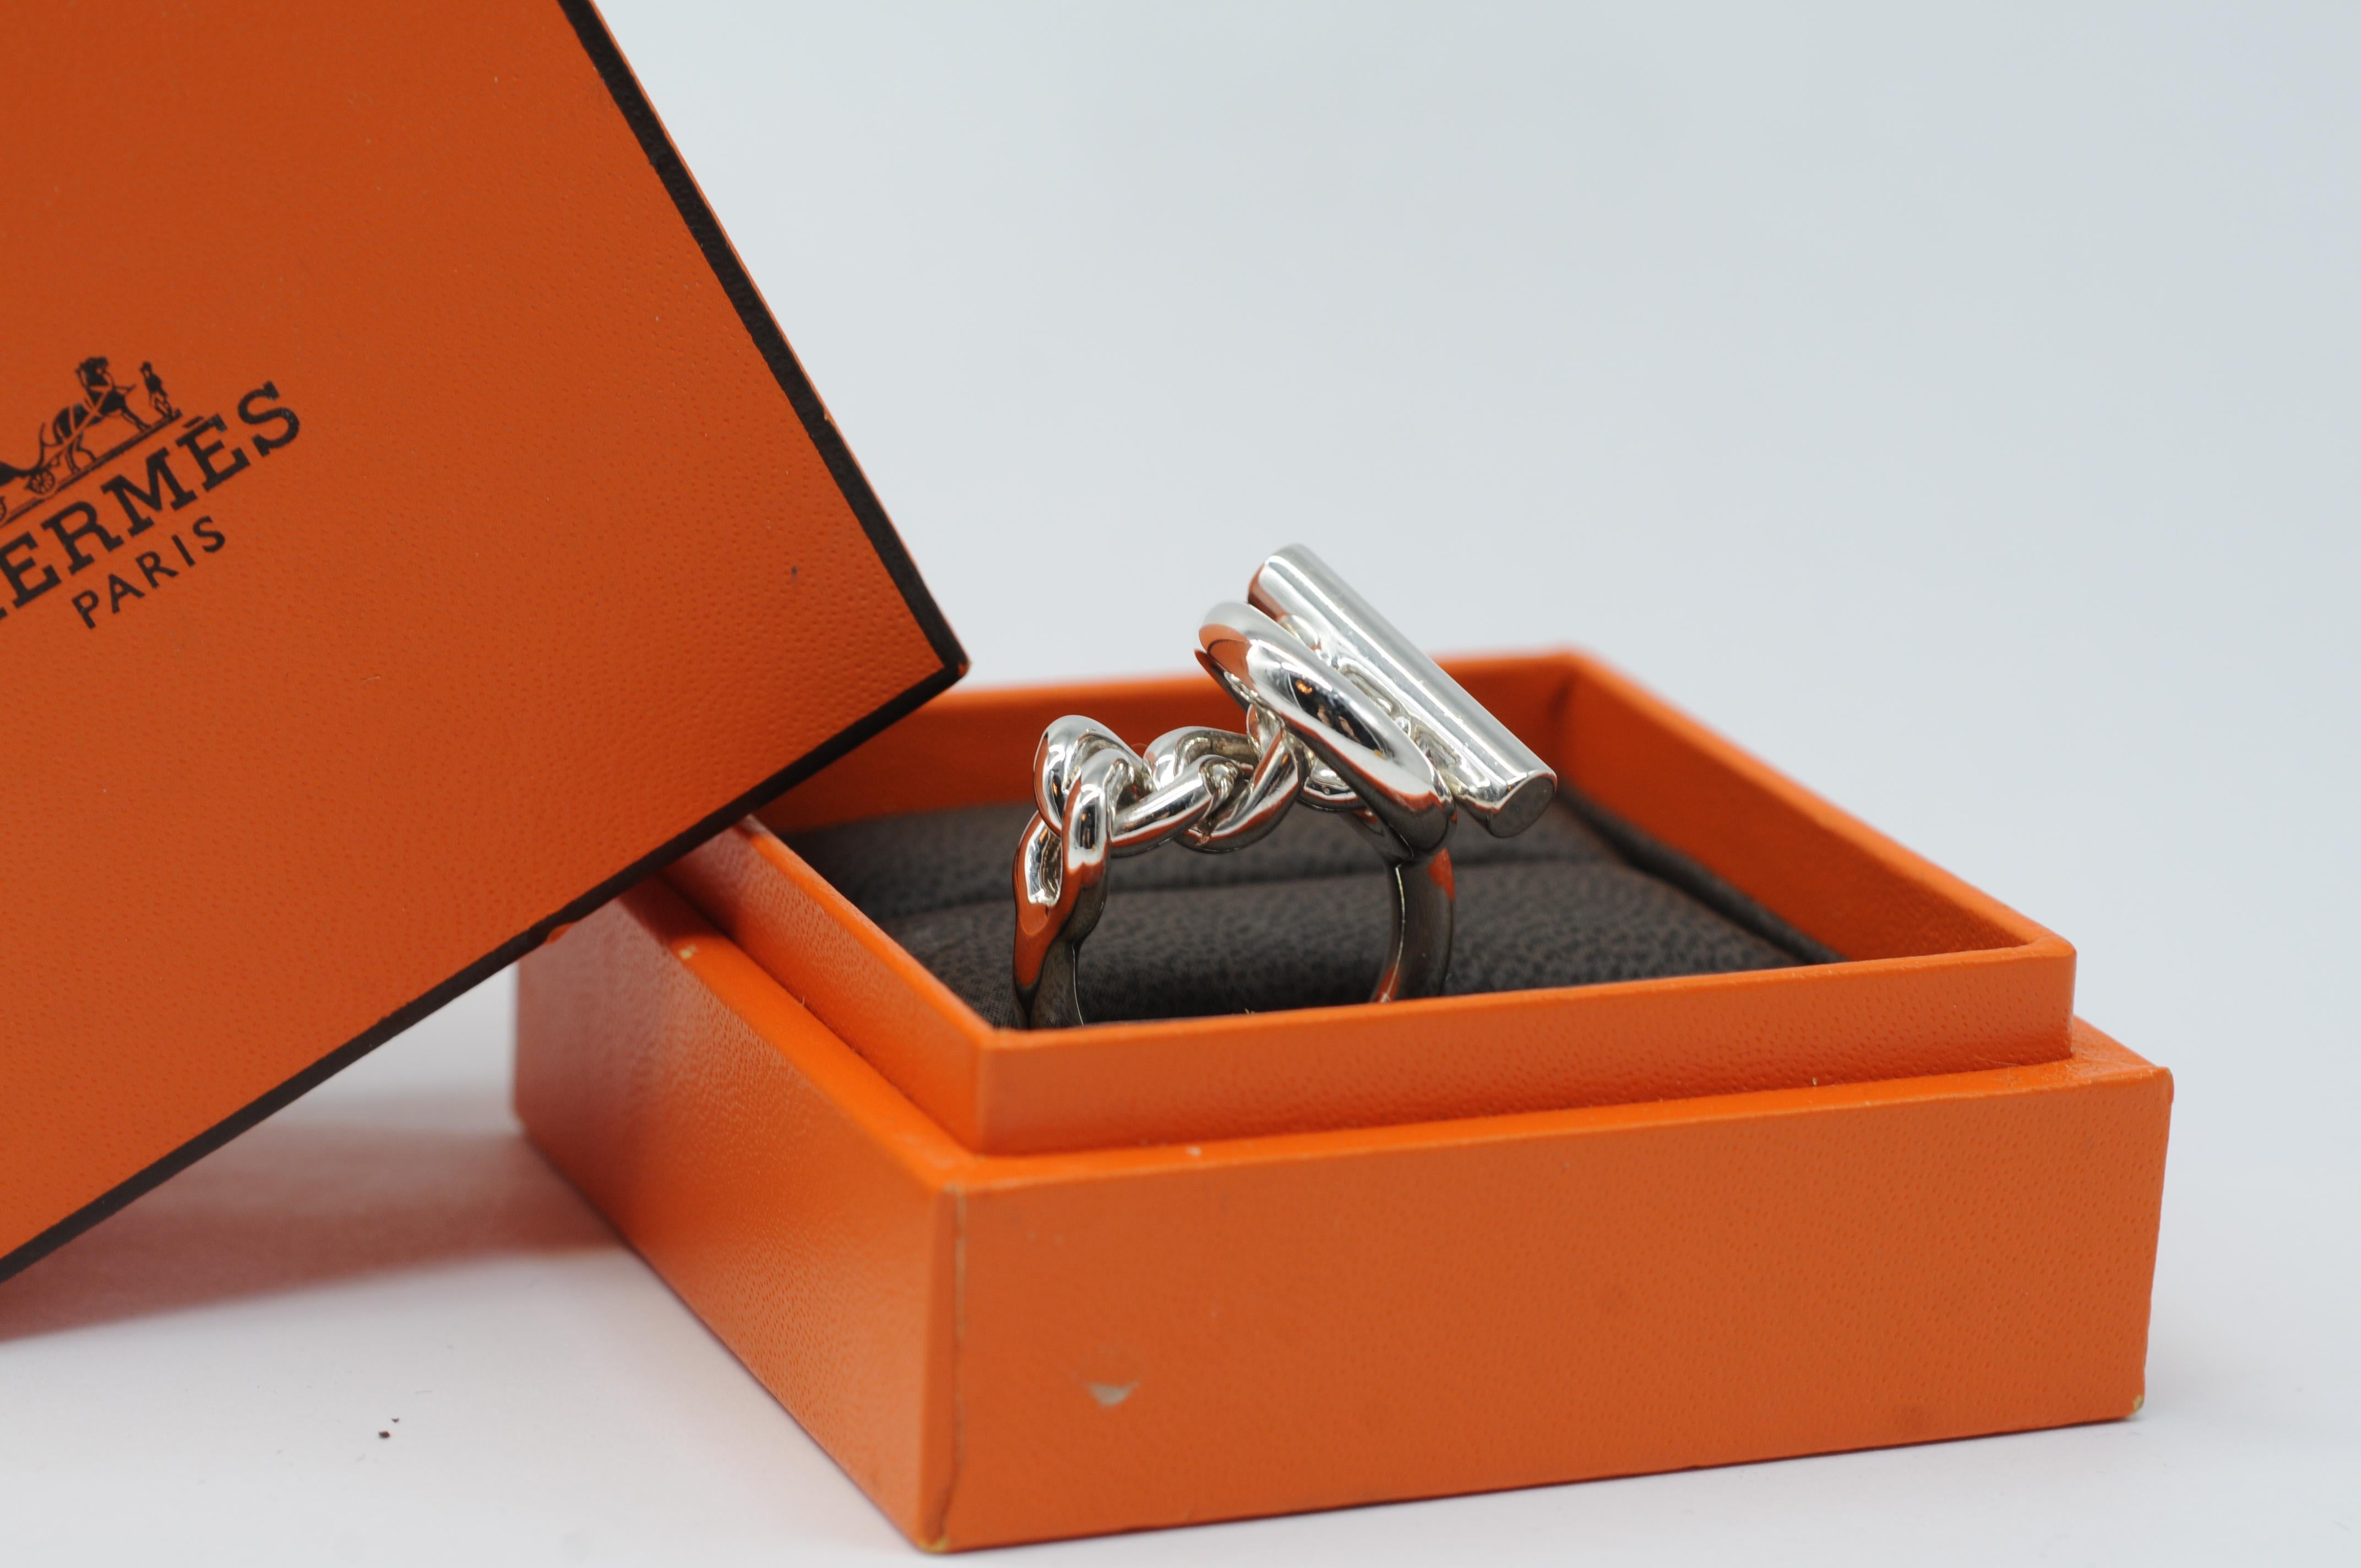 Introducing the mesmerizing Croissete silver ring by Hermes, a true embodiment of elegance and style. This beautiful, solid ring has been freshly polished and is in excellent condition, ready to adorn your hand with its timeless charm.

Crafted to